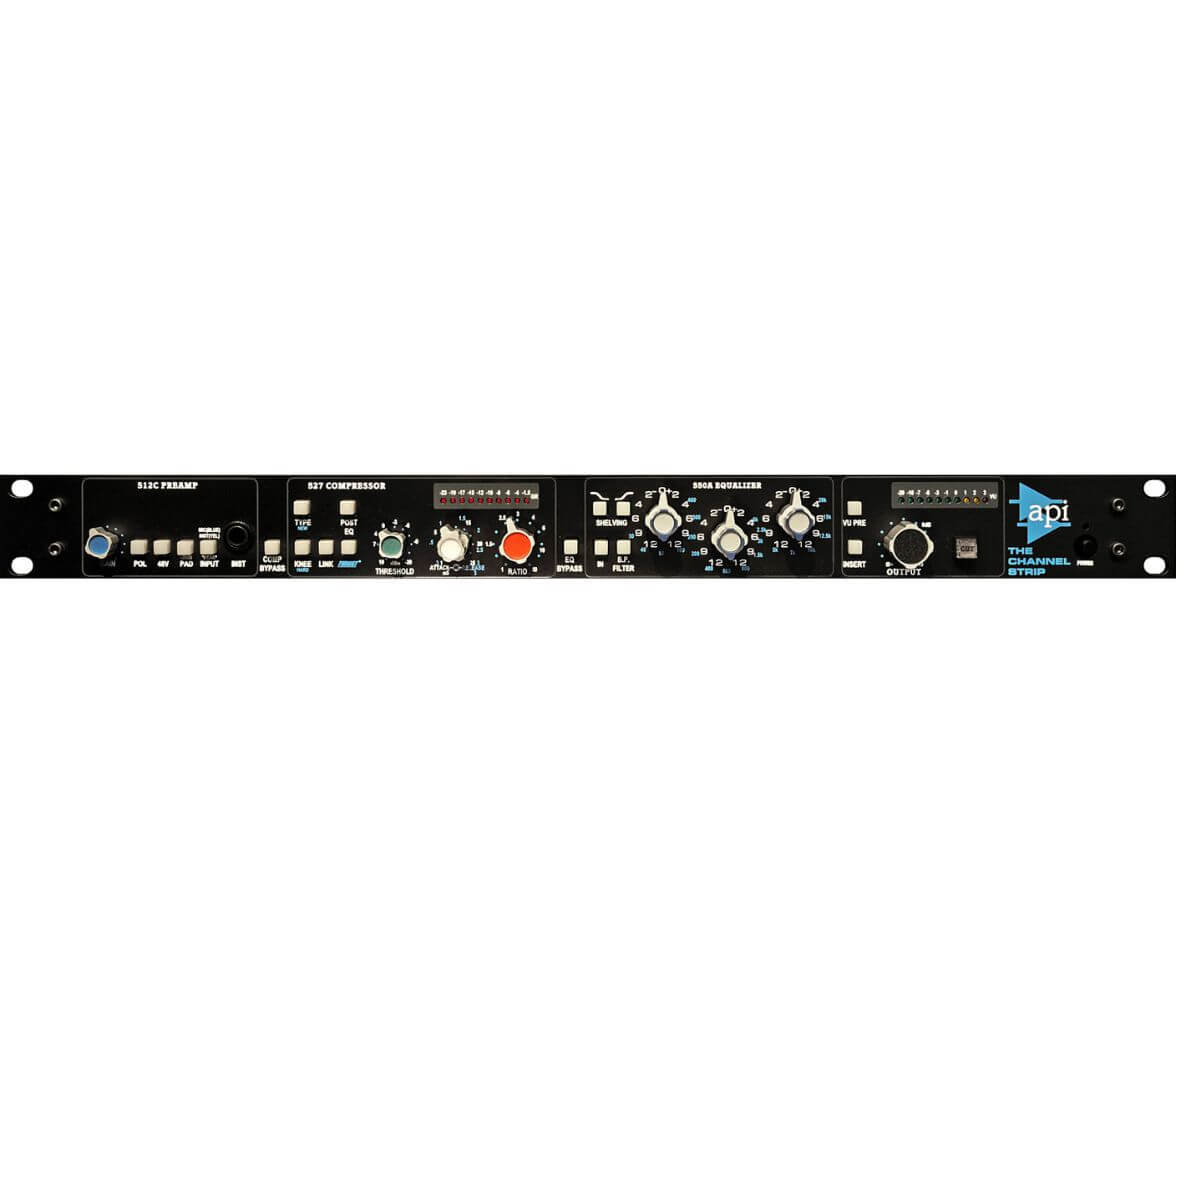 RACK MOUNT PRODUCT The Channel Strip